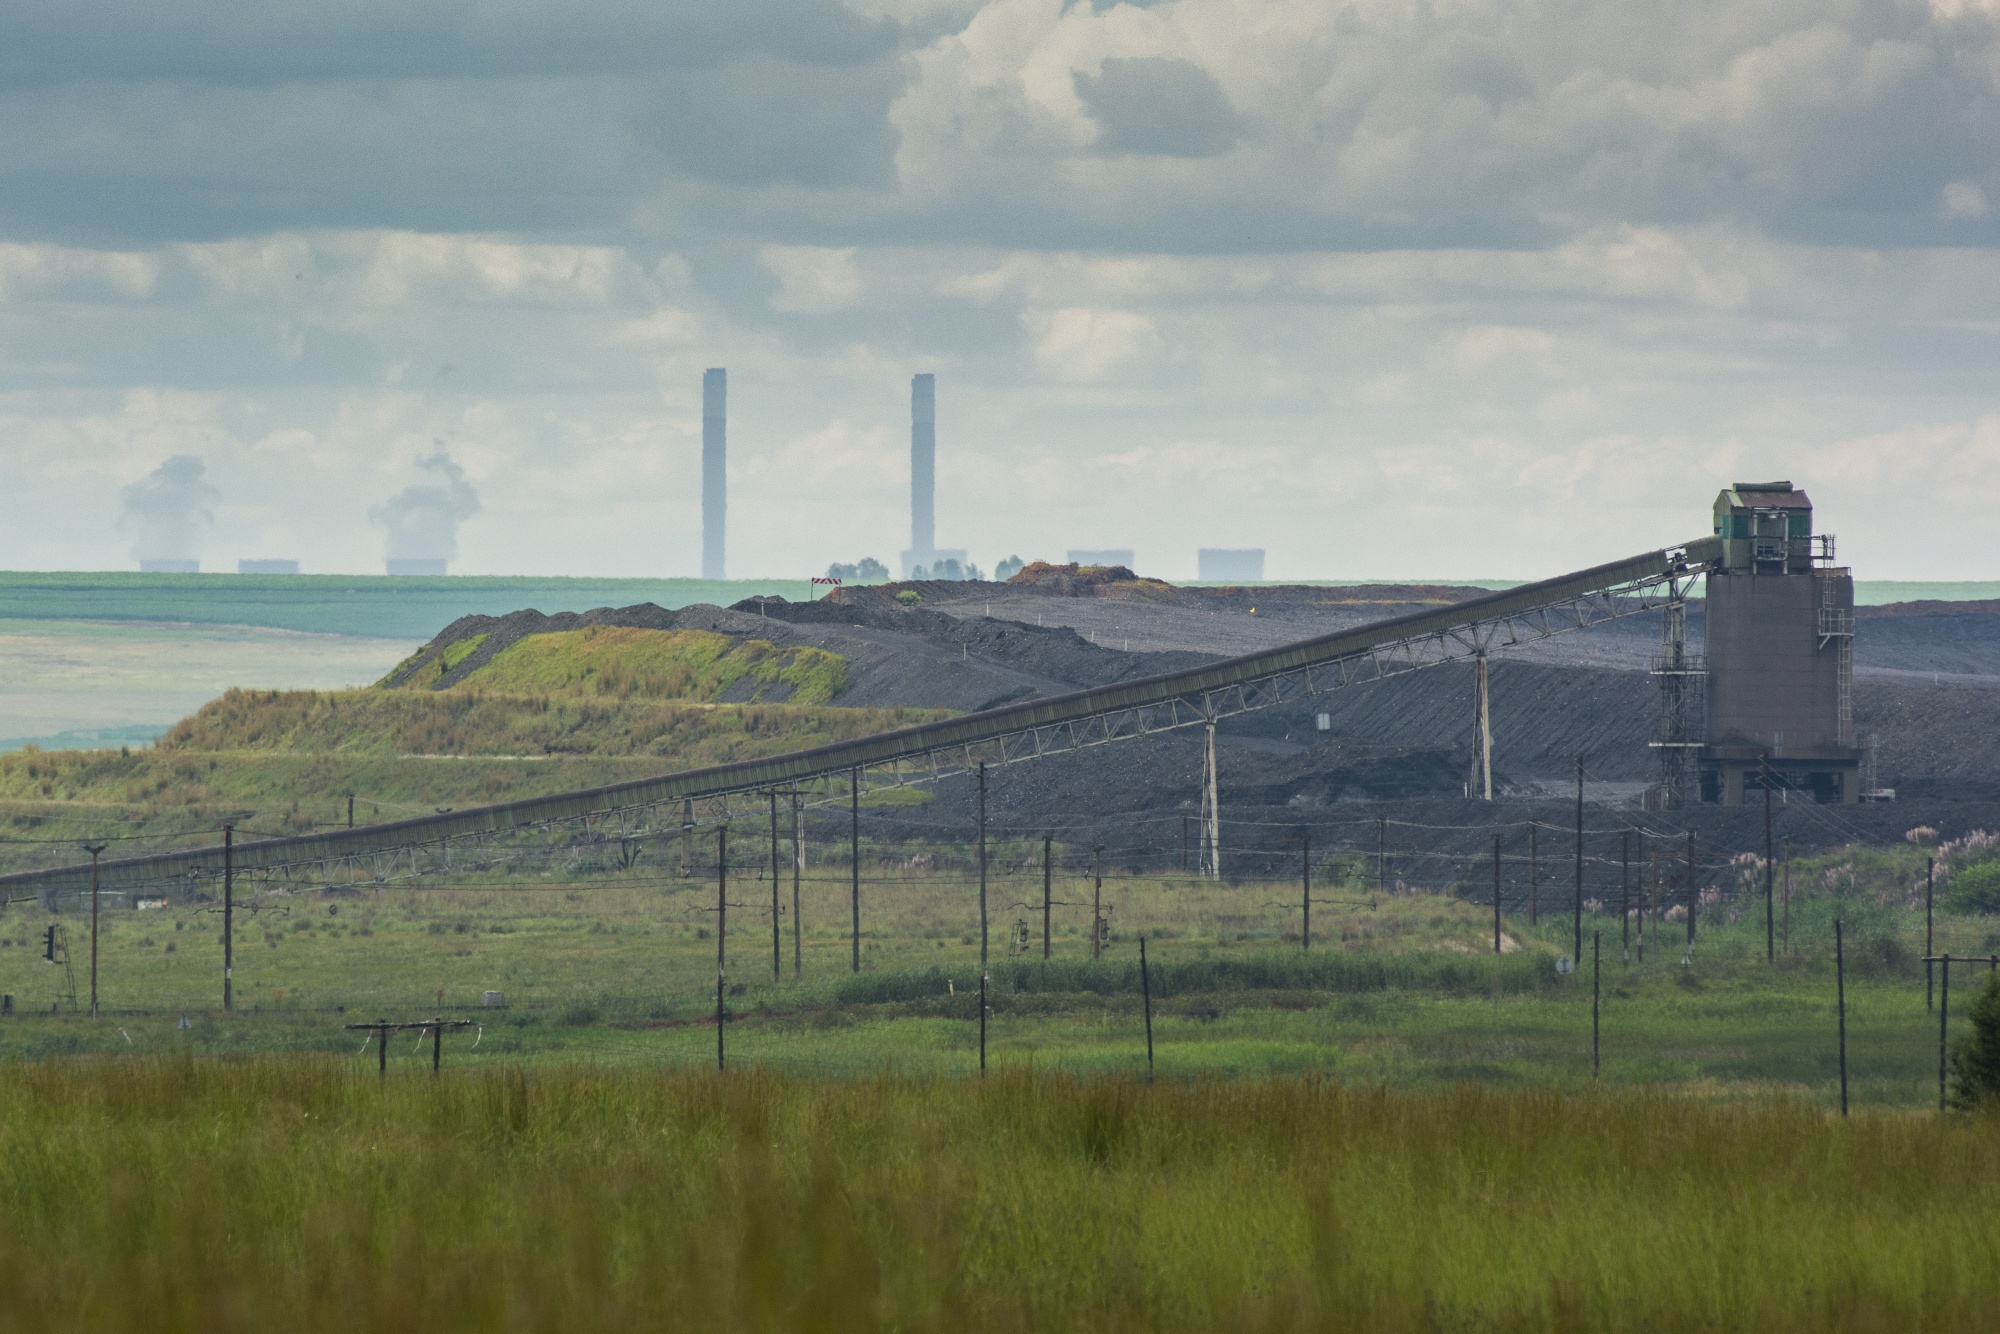 An Anglo American coal mine in Mpumalanga, South Africa.